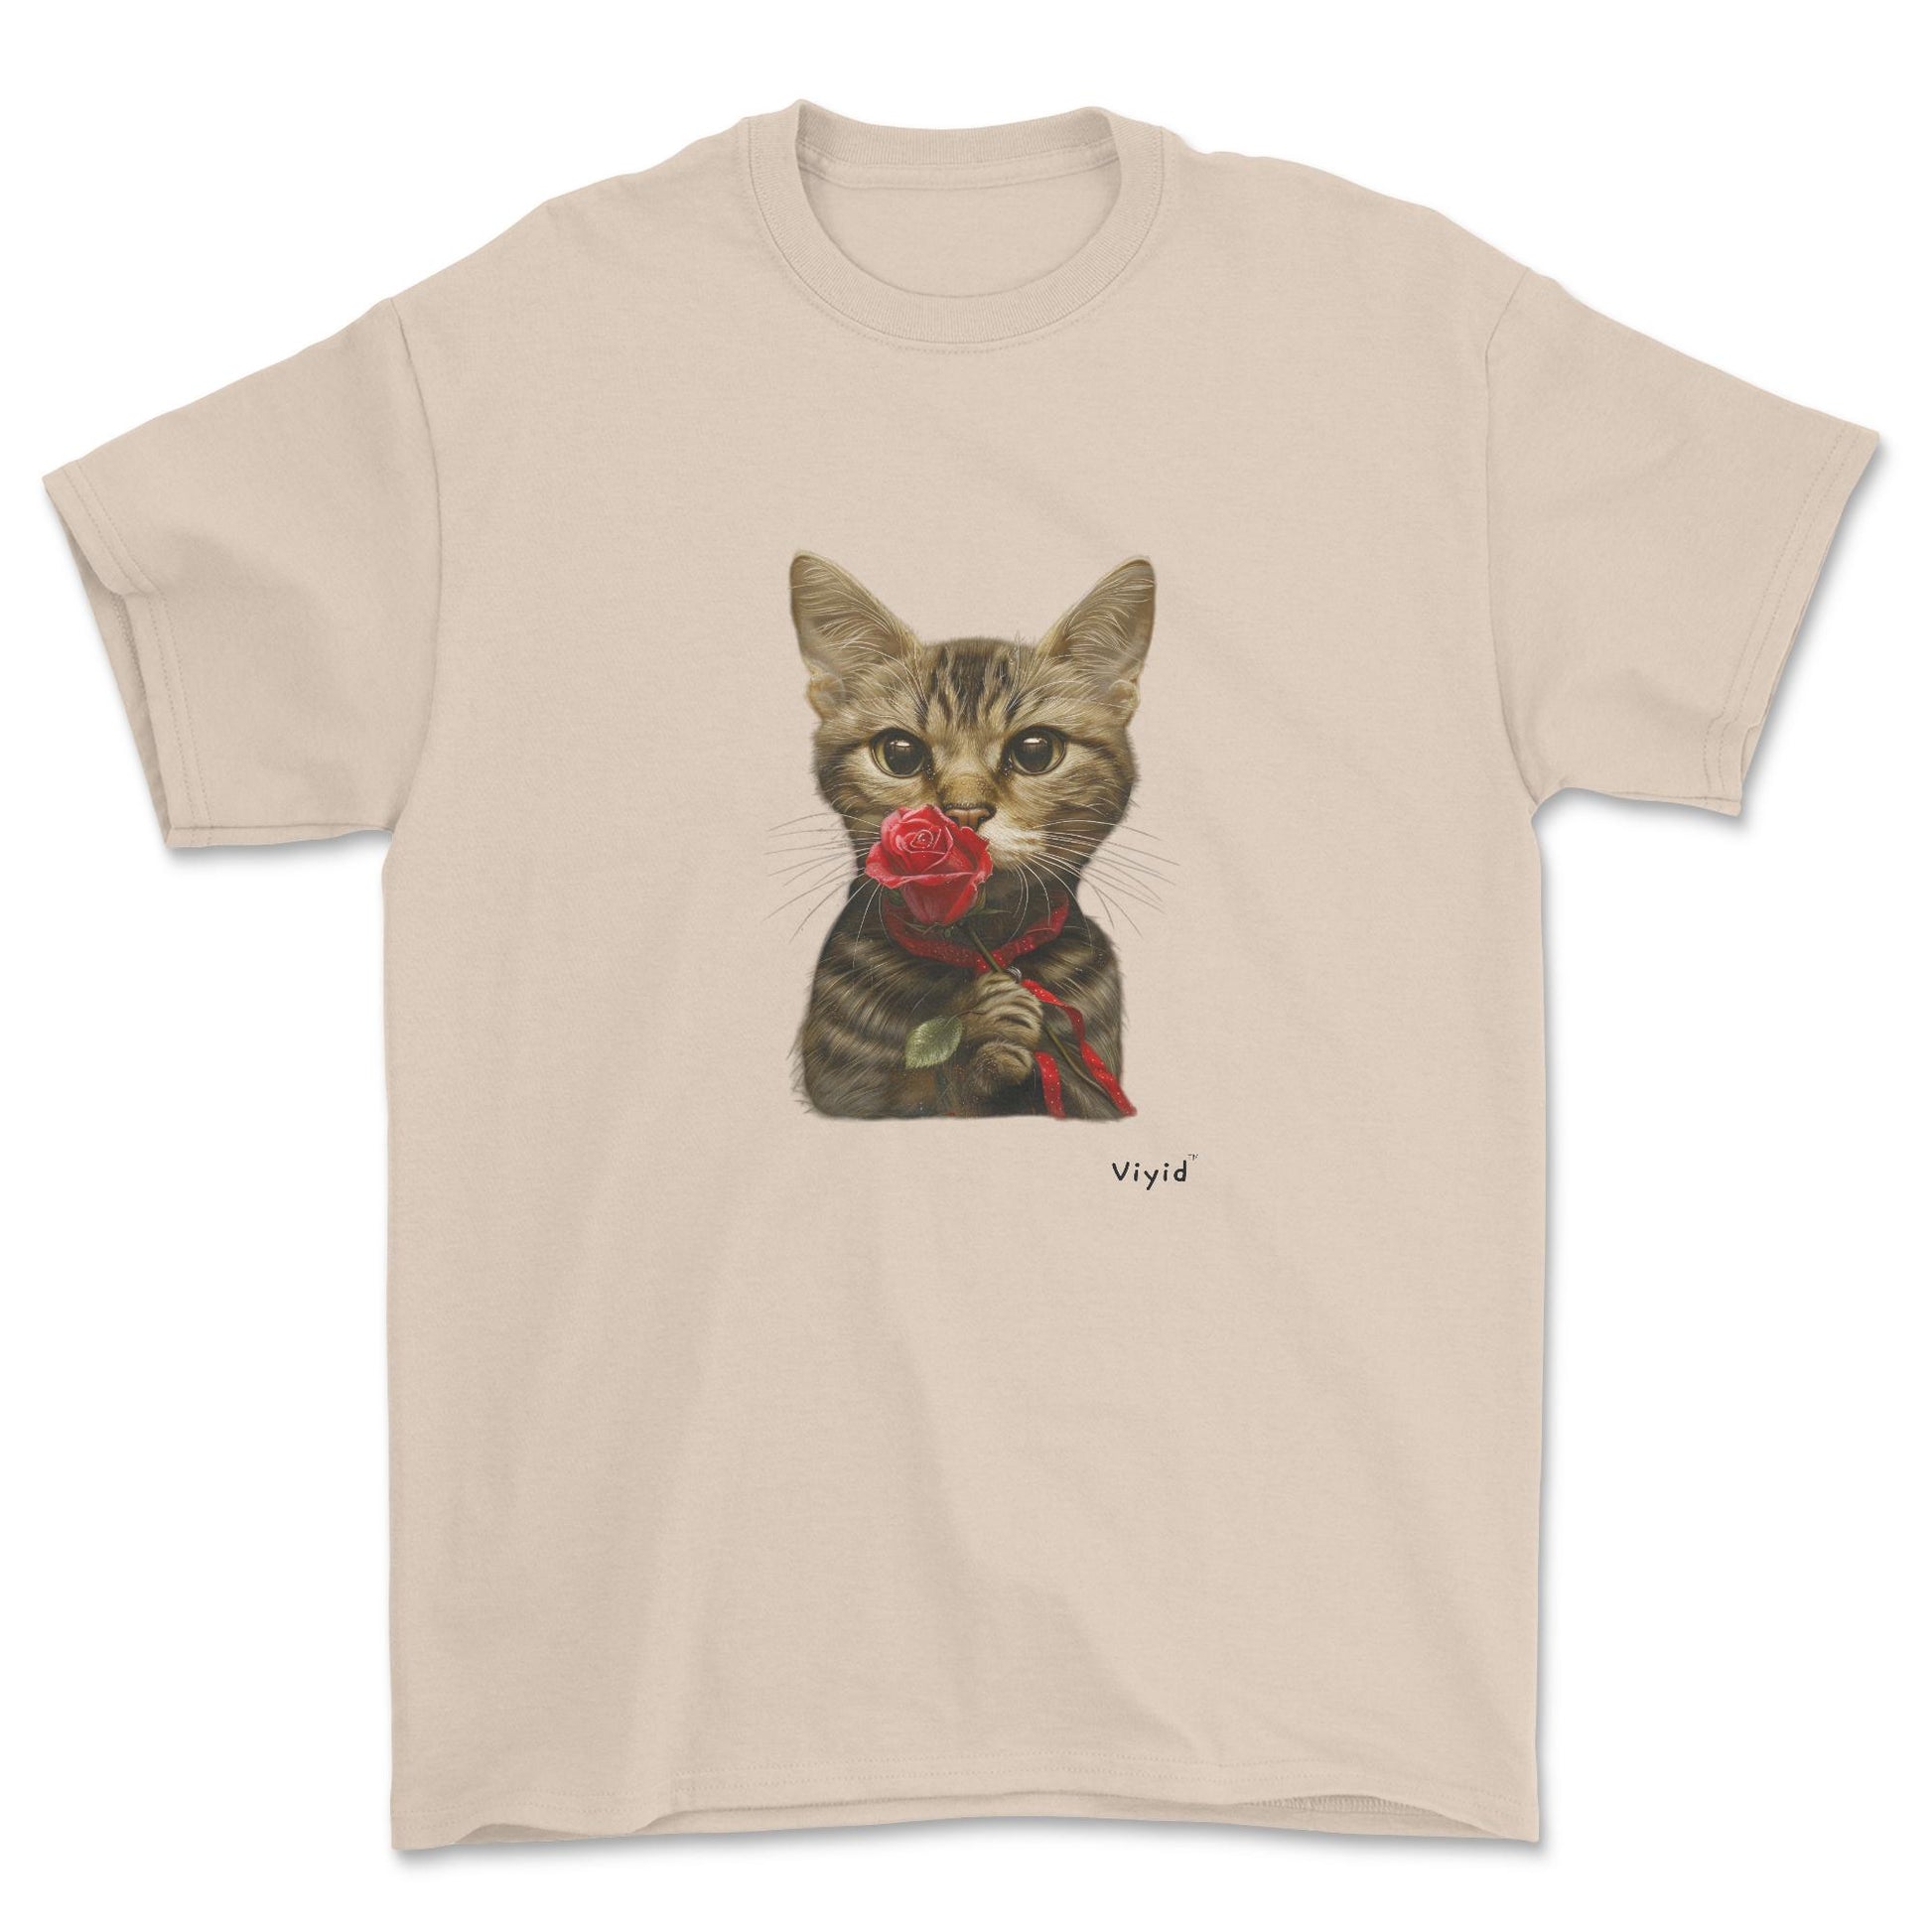 sniffing rose domestic shorthair cat adult t-shirt sand